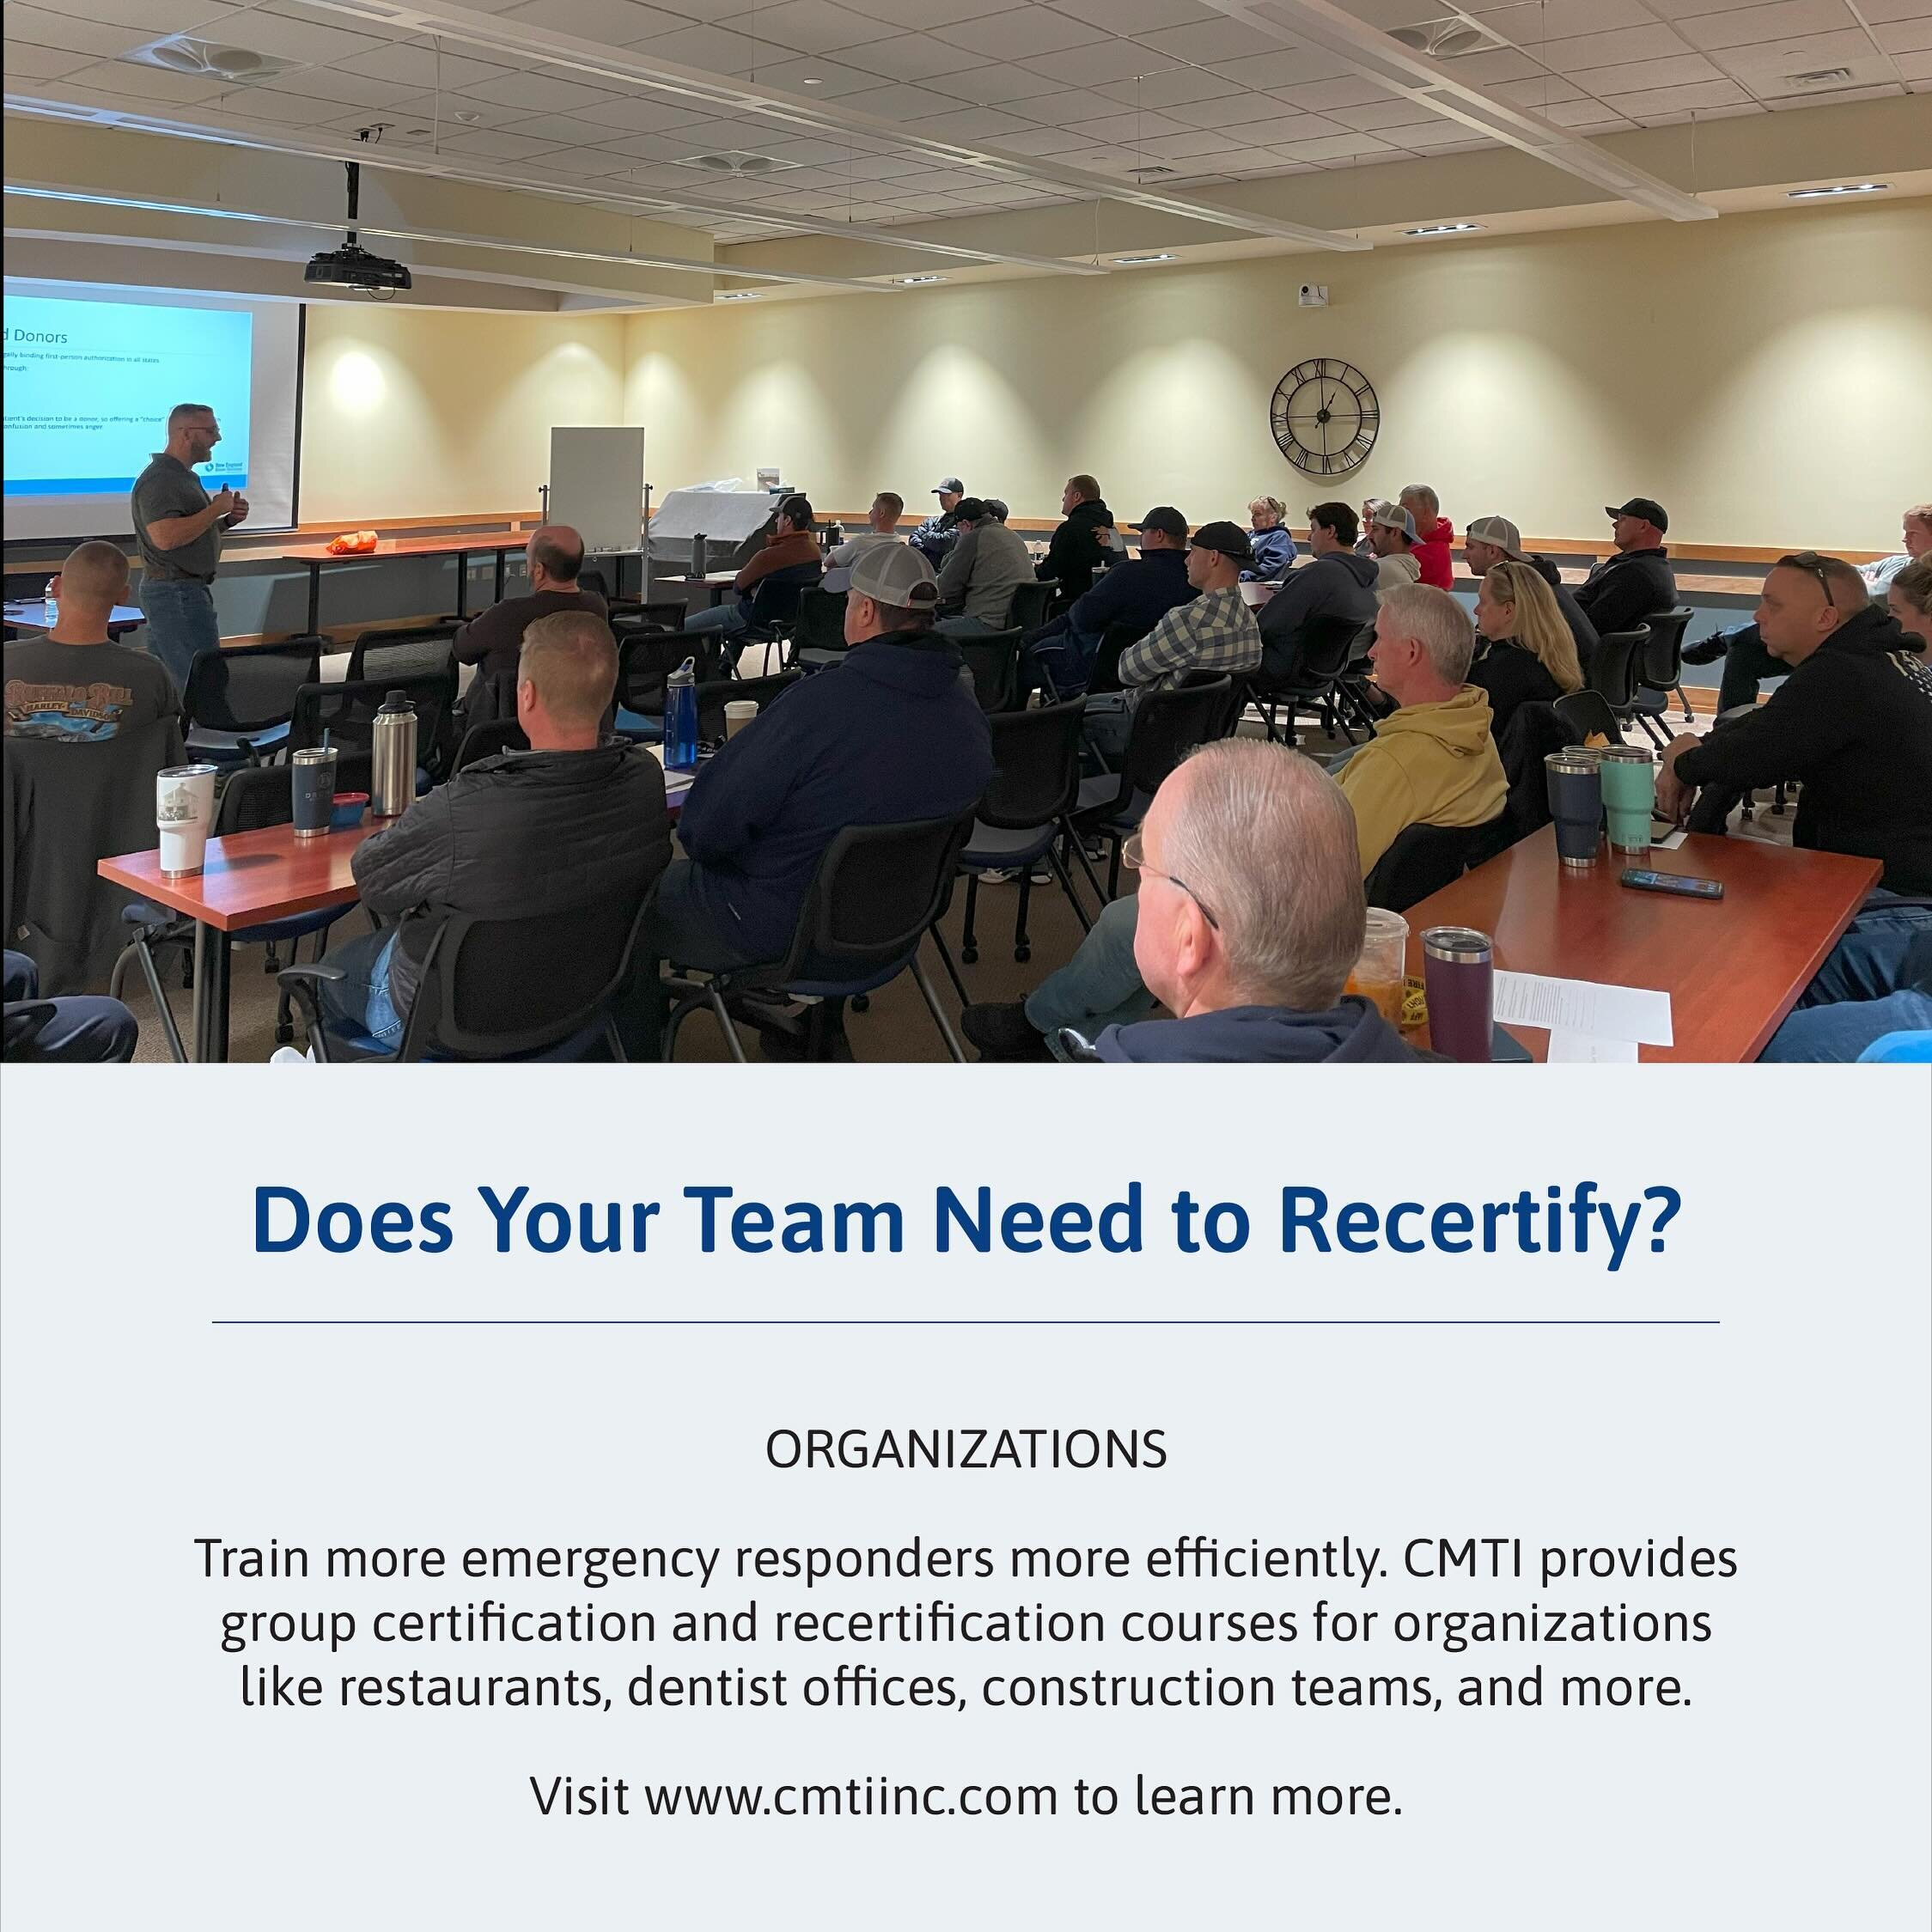 CMTI offers certification and recertification courses for organizations like restaurants, construction companies, dentist offices, and much more. Contact us online for certification and recertification courses! 

#CMTIEMS #EMT #Paramedic #courses #tr